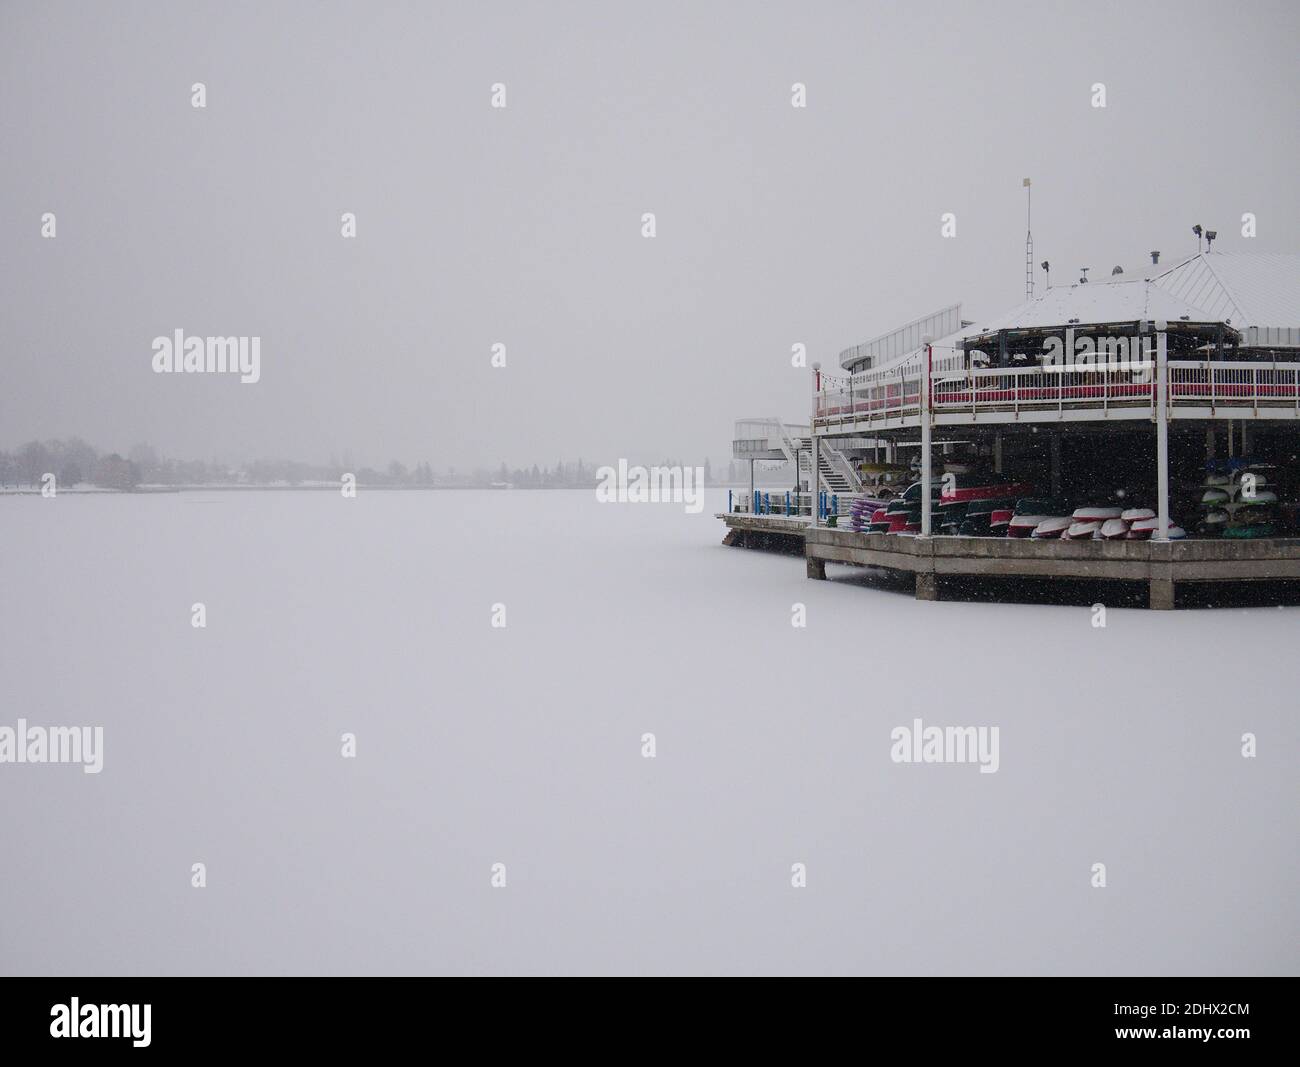 My favourite scene - Dow's Lake Pavilion lost in the snowy whiteness on a frozen expanse of more whiteness. So much white. Ottawa, Canada. Stock Photo